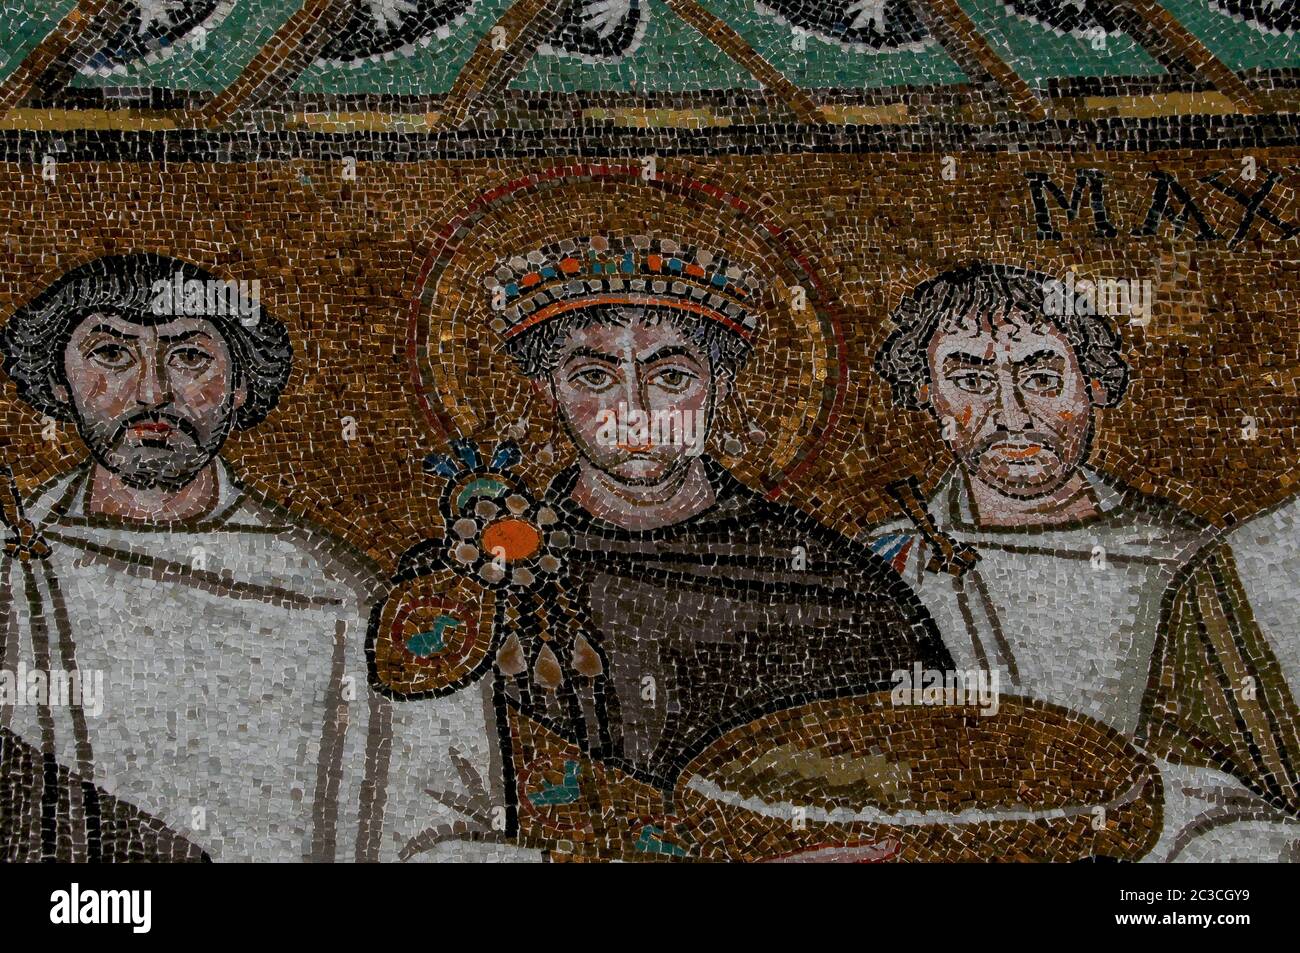 Byzantine Emperor Justinian I, also known as Justinian the Great, flanked by members of his retinue.  Byzantine mosaic in the Basilica di San Vitale at Ravenna, Emilia-Romagna, Italy.  The mosaic was created in the 500s AD, a few years after Ravenna was captured by the Byzantine Empire from the Ostrogoths. Stock Photo